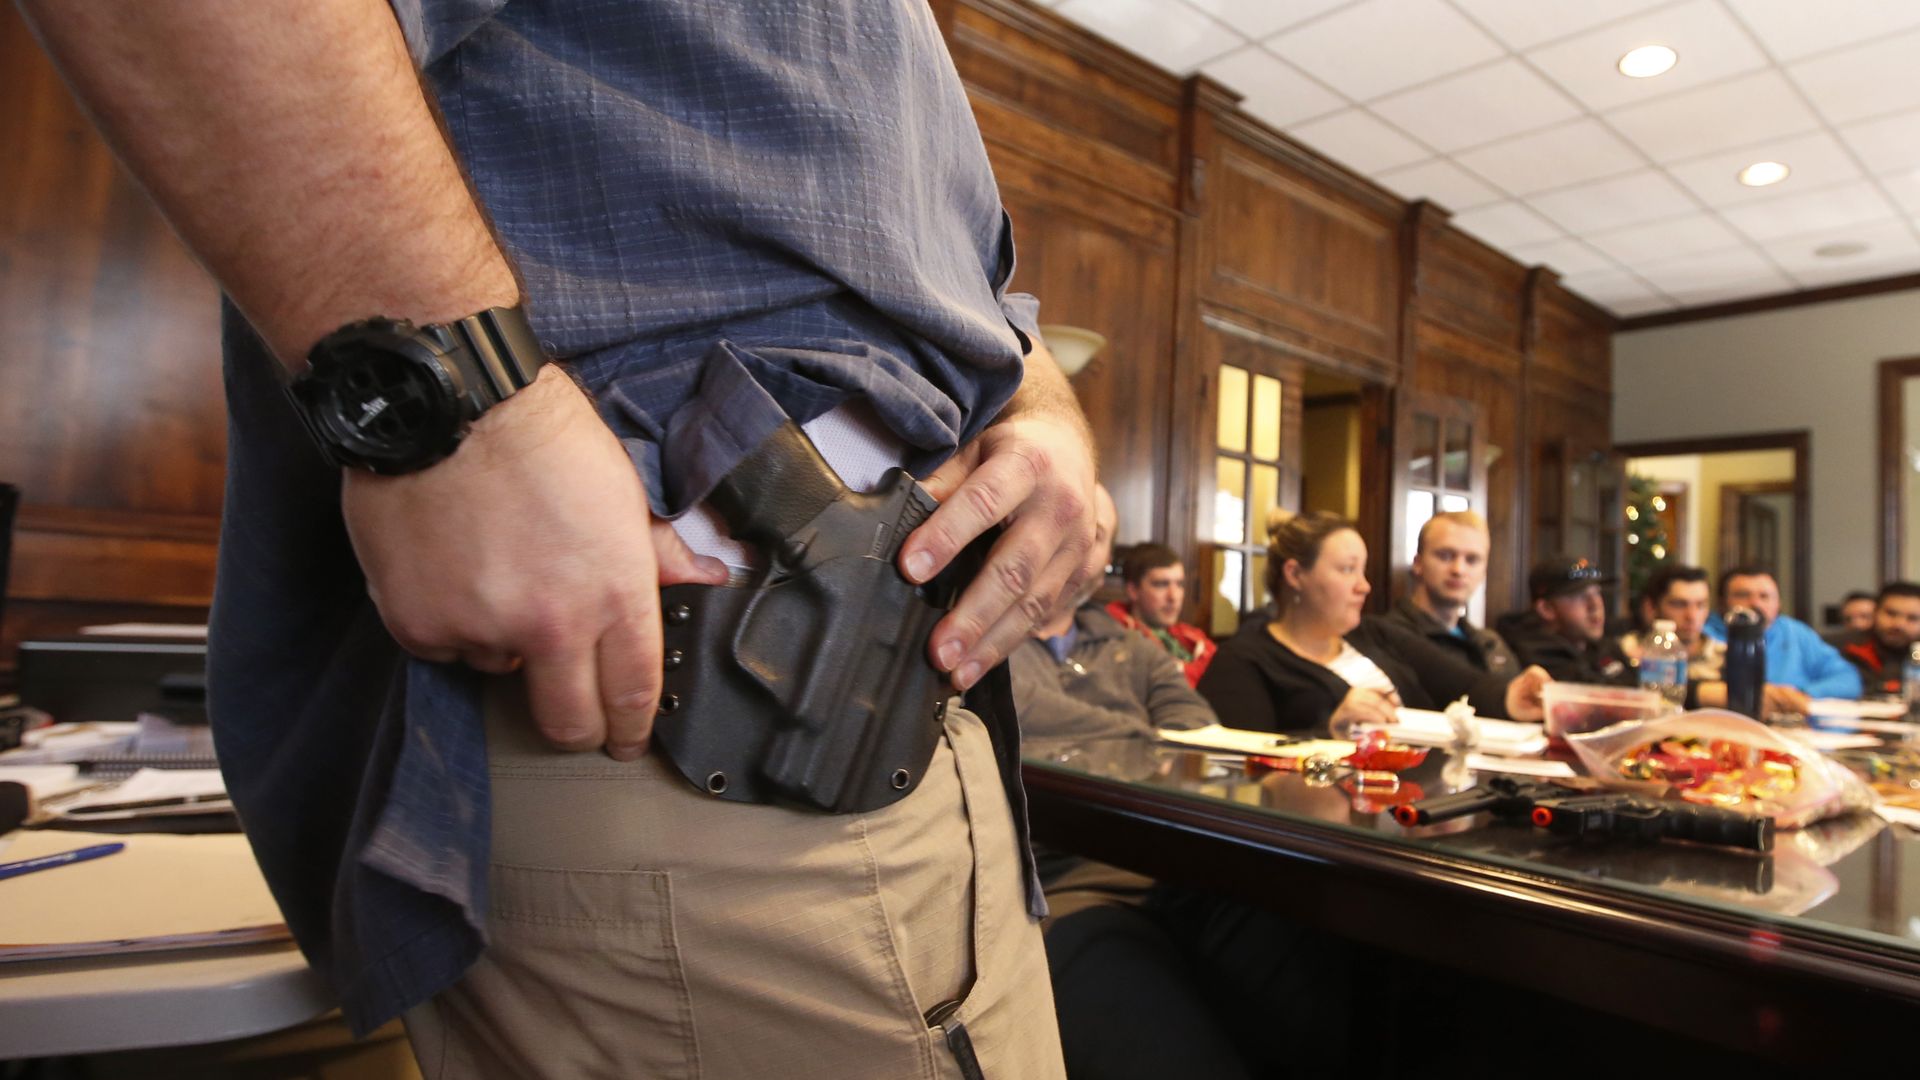 A concealed carry permit class